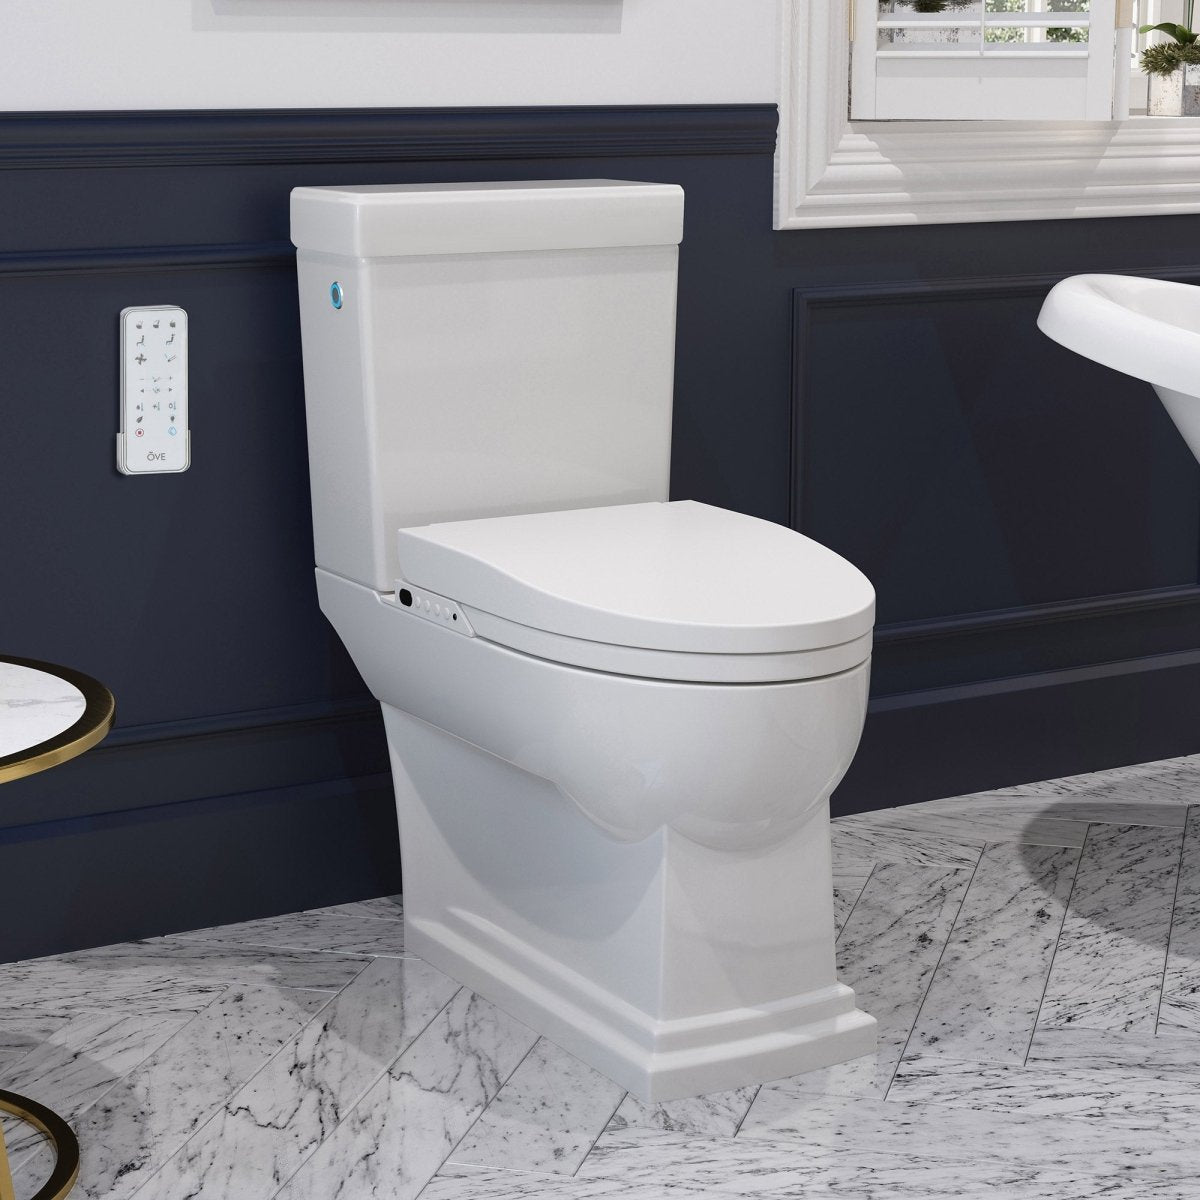 OVE Decors Irenne Elongated Smart Bidet Toilet with Remote Control - Alpine Outlets